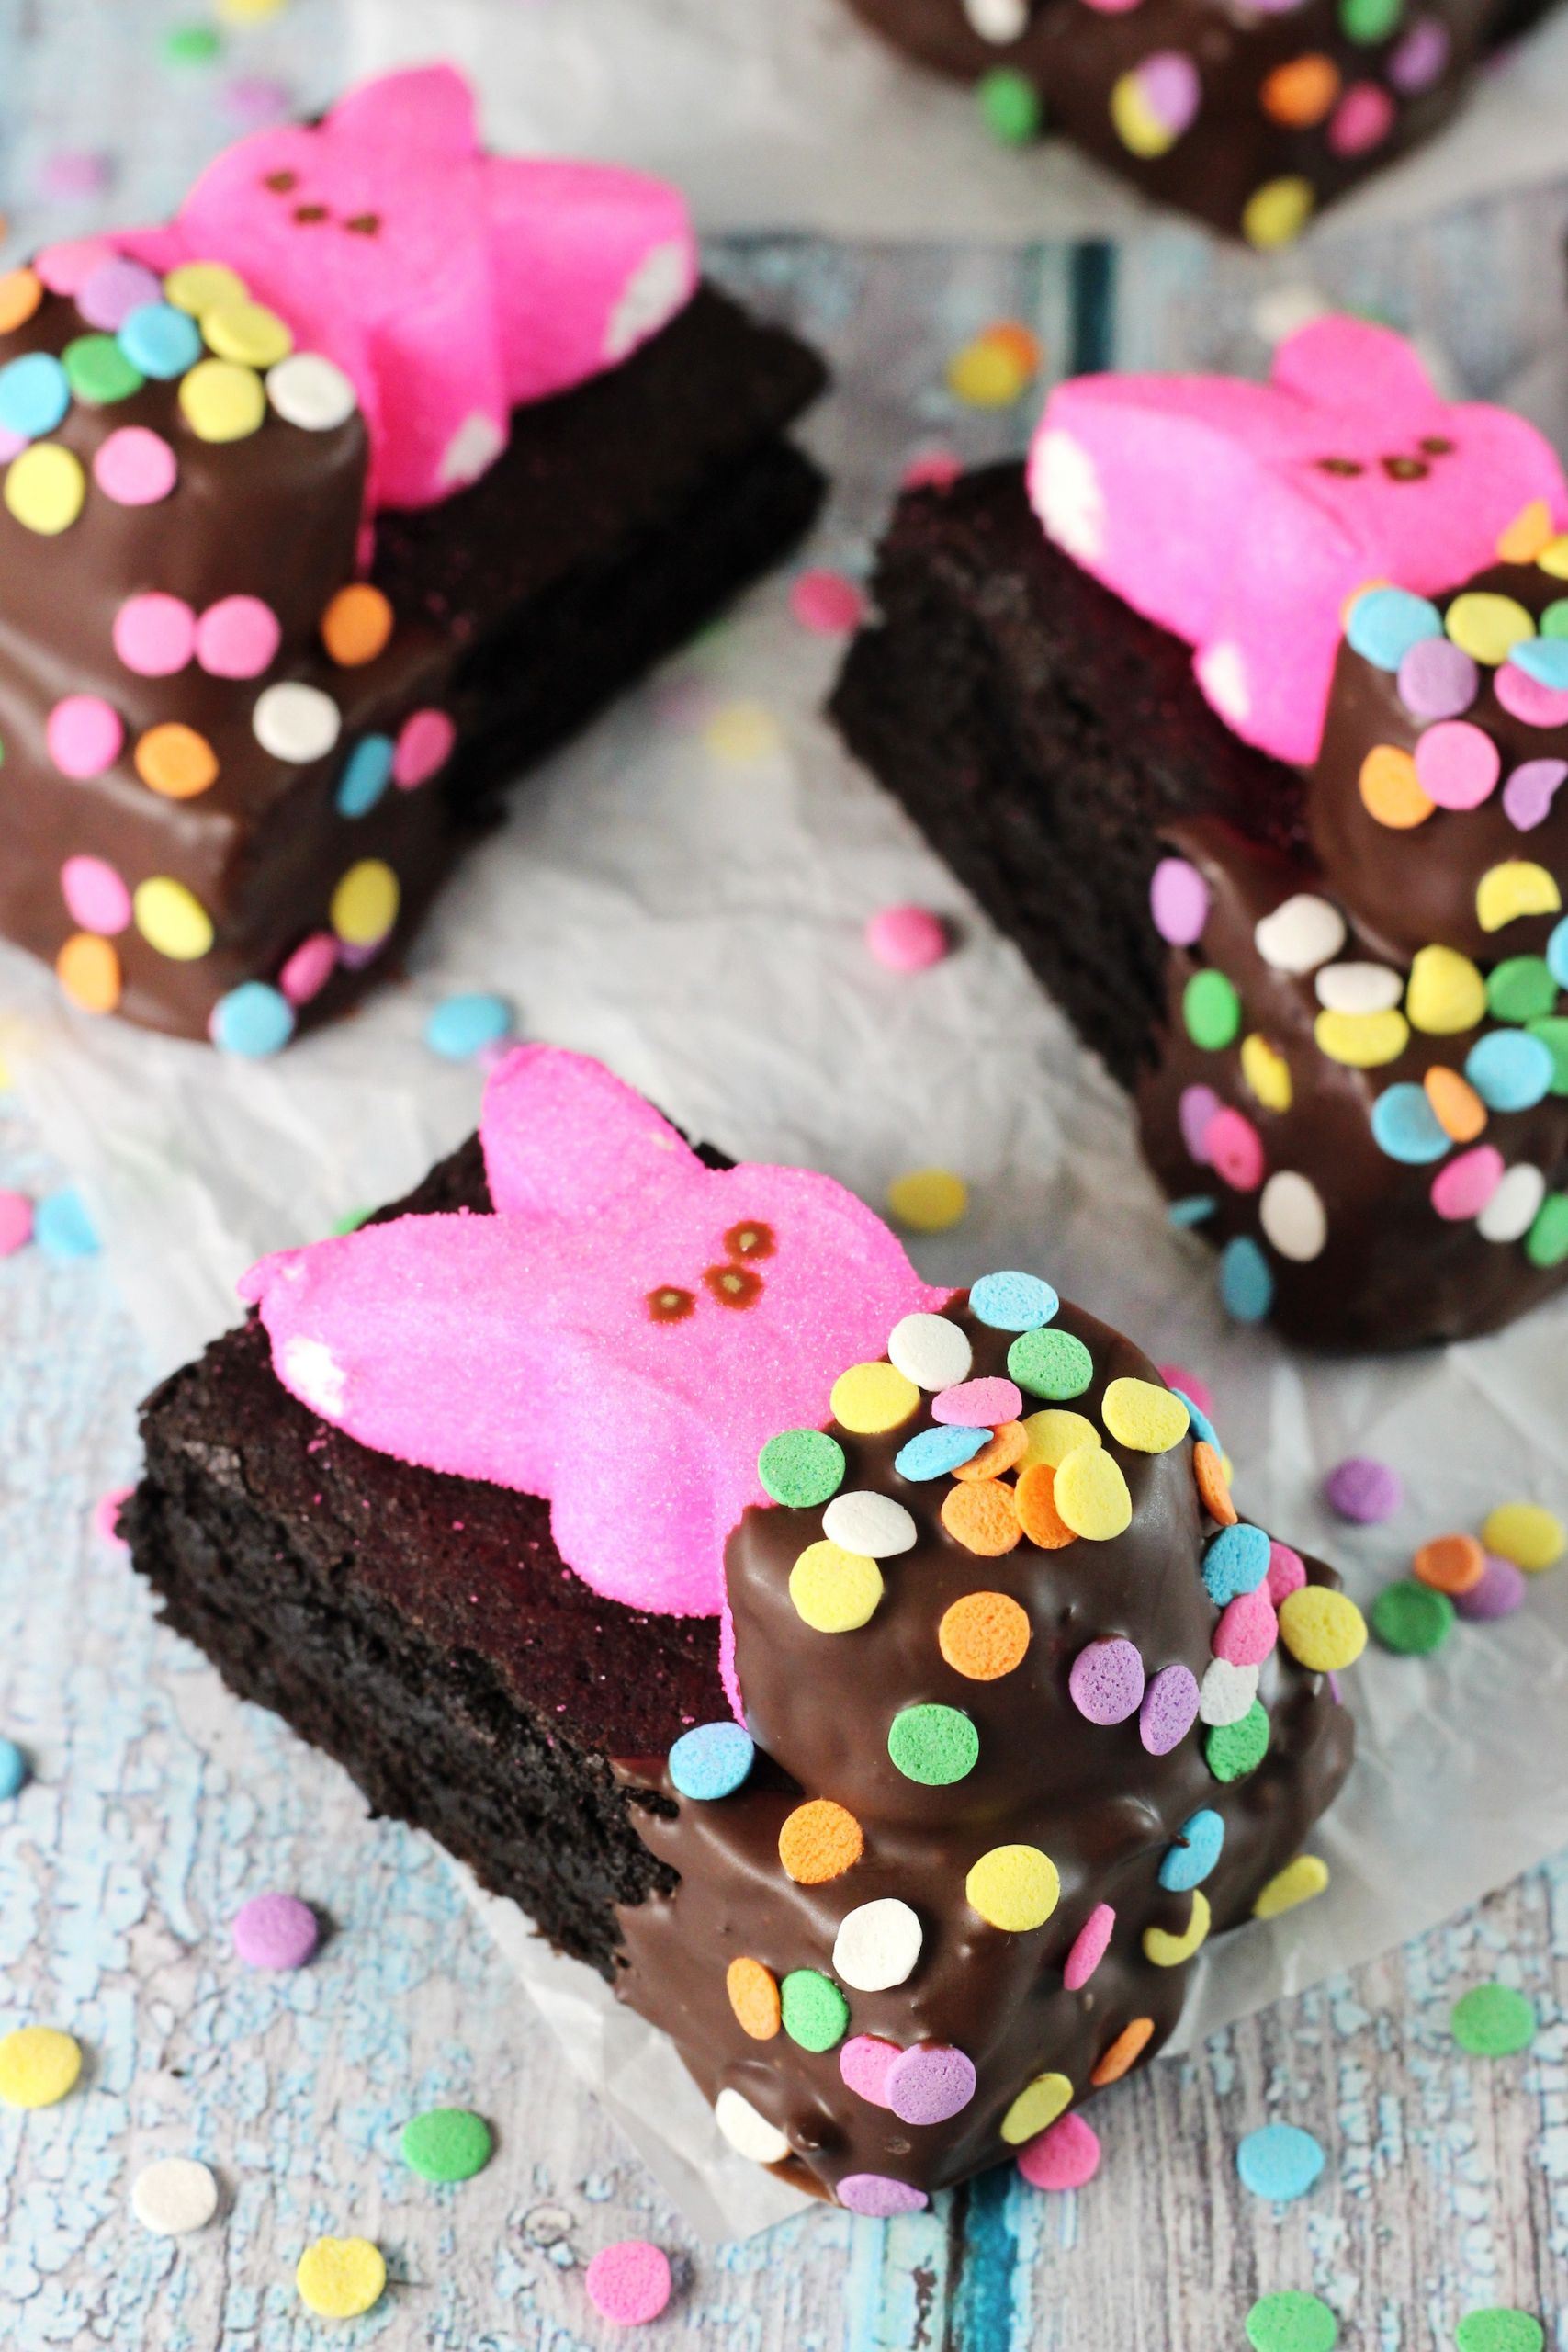 Quick Easter Desserts
 11 Easy Easter Desserts That Are Almost Too Adorable To